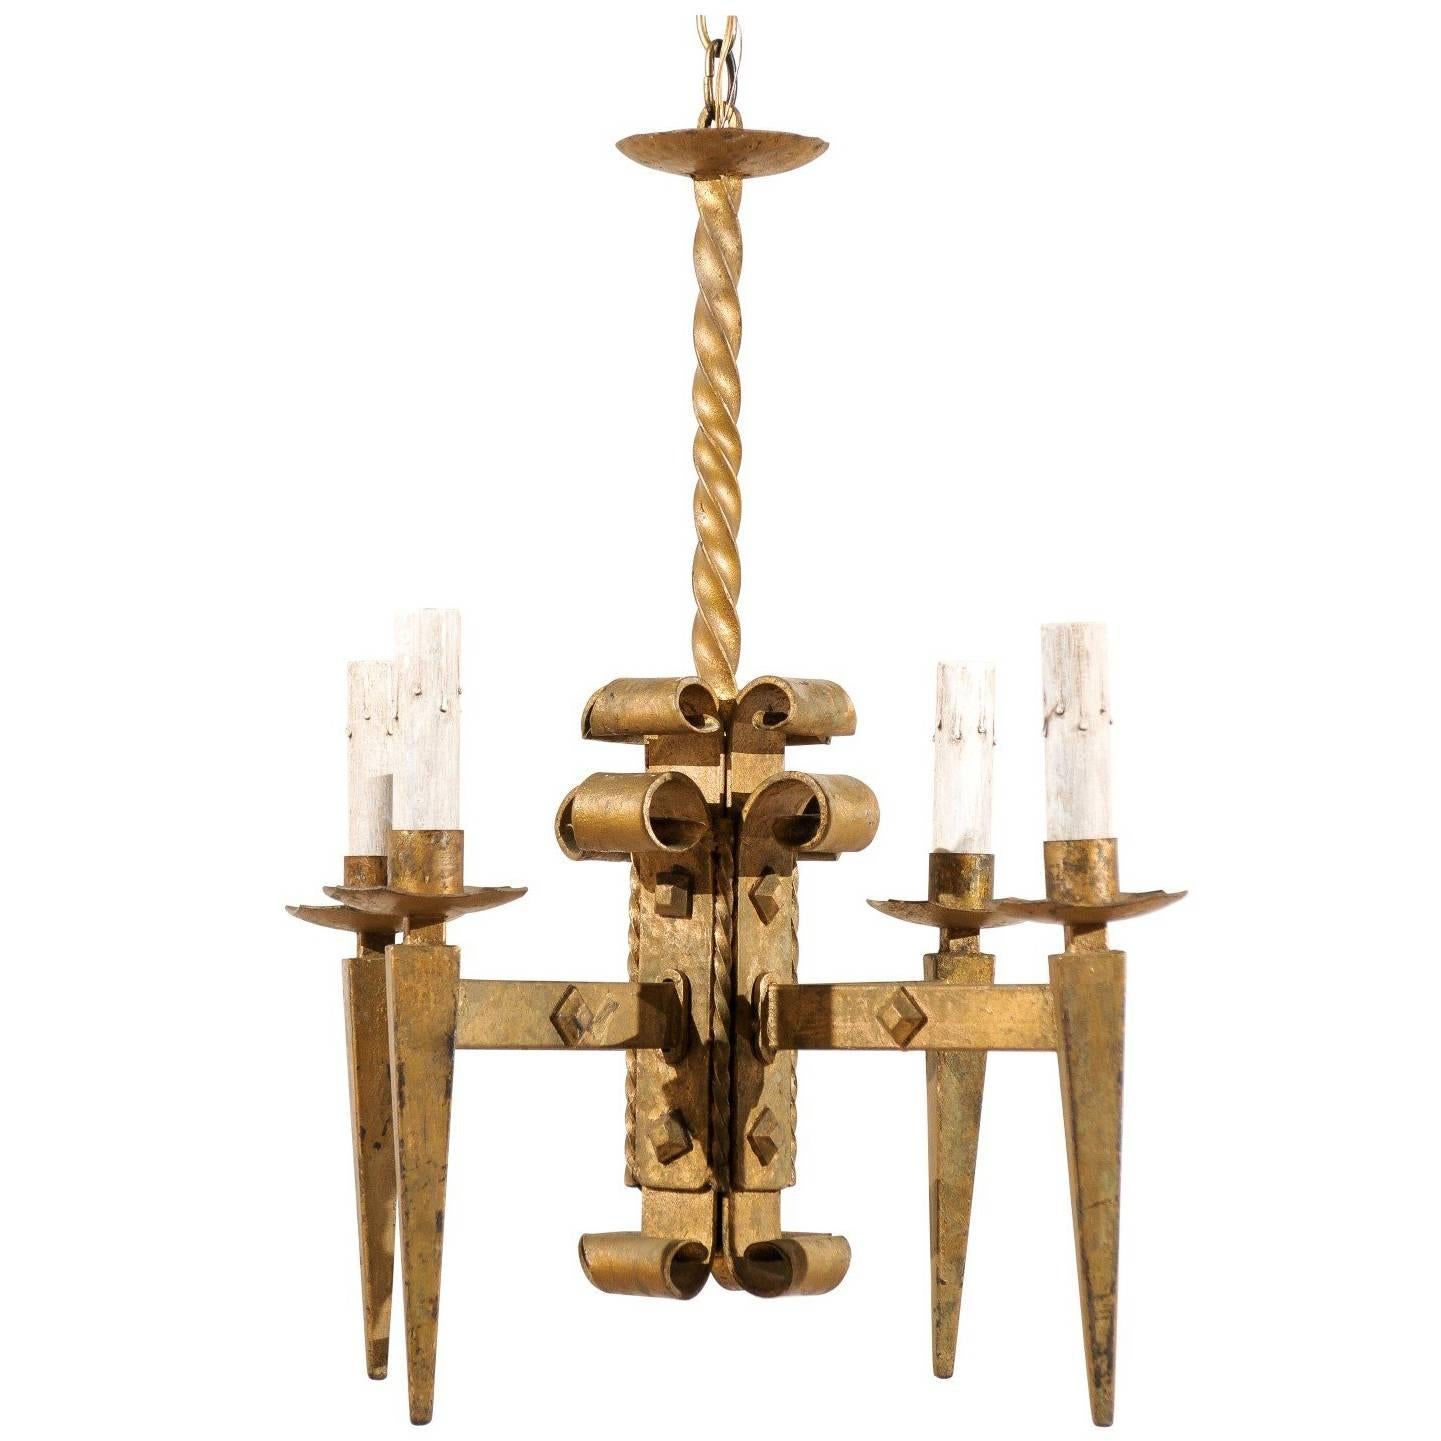 French Vintage Four-Light Chandelier with Torch-Shaped Arms, 20th Century